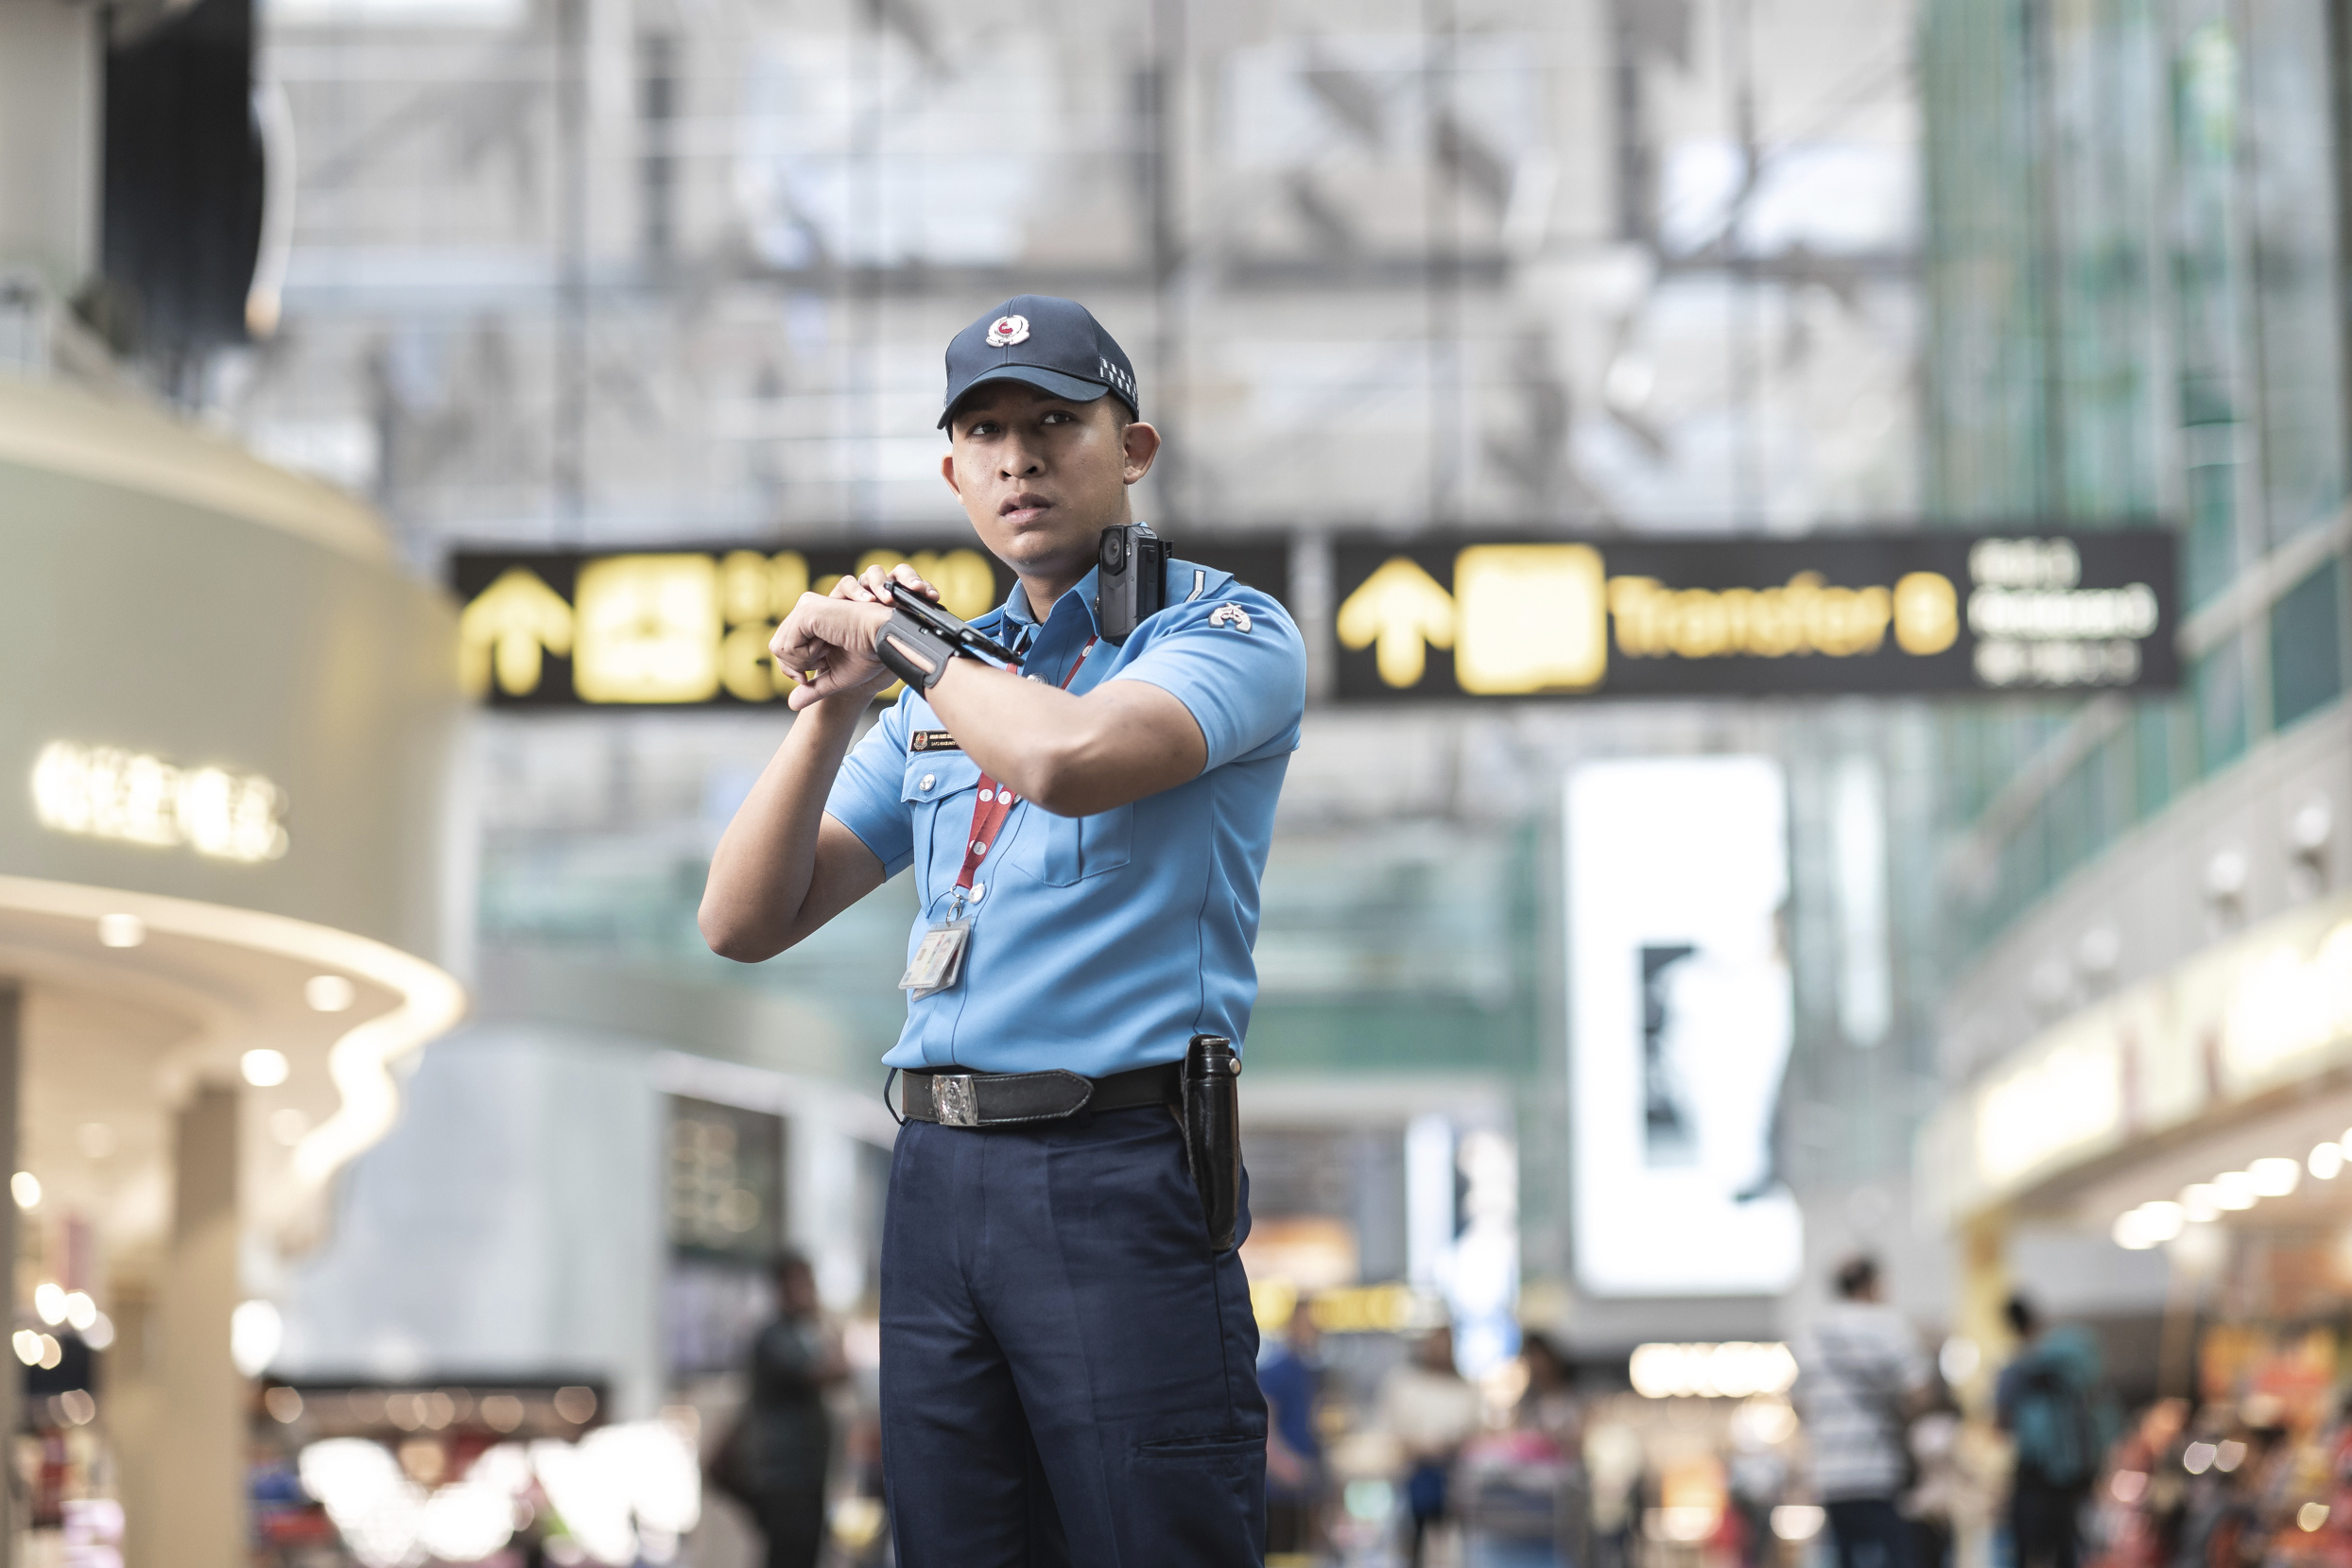 Auxiliary Police Officer in Airport